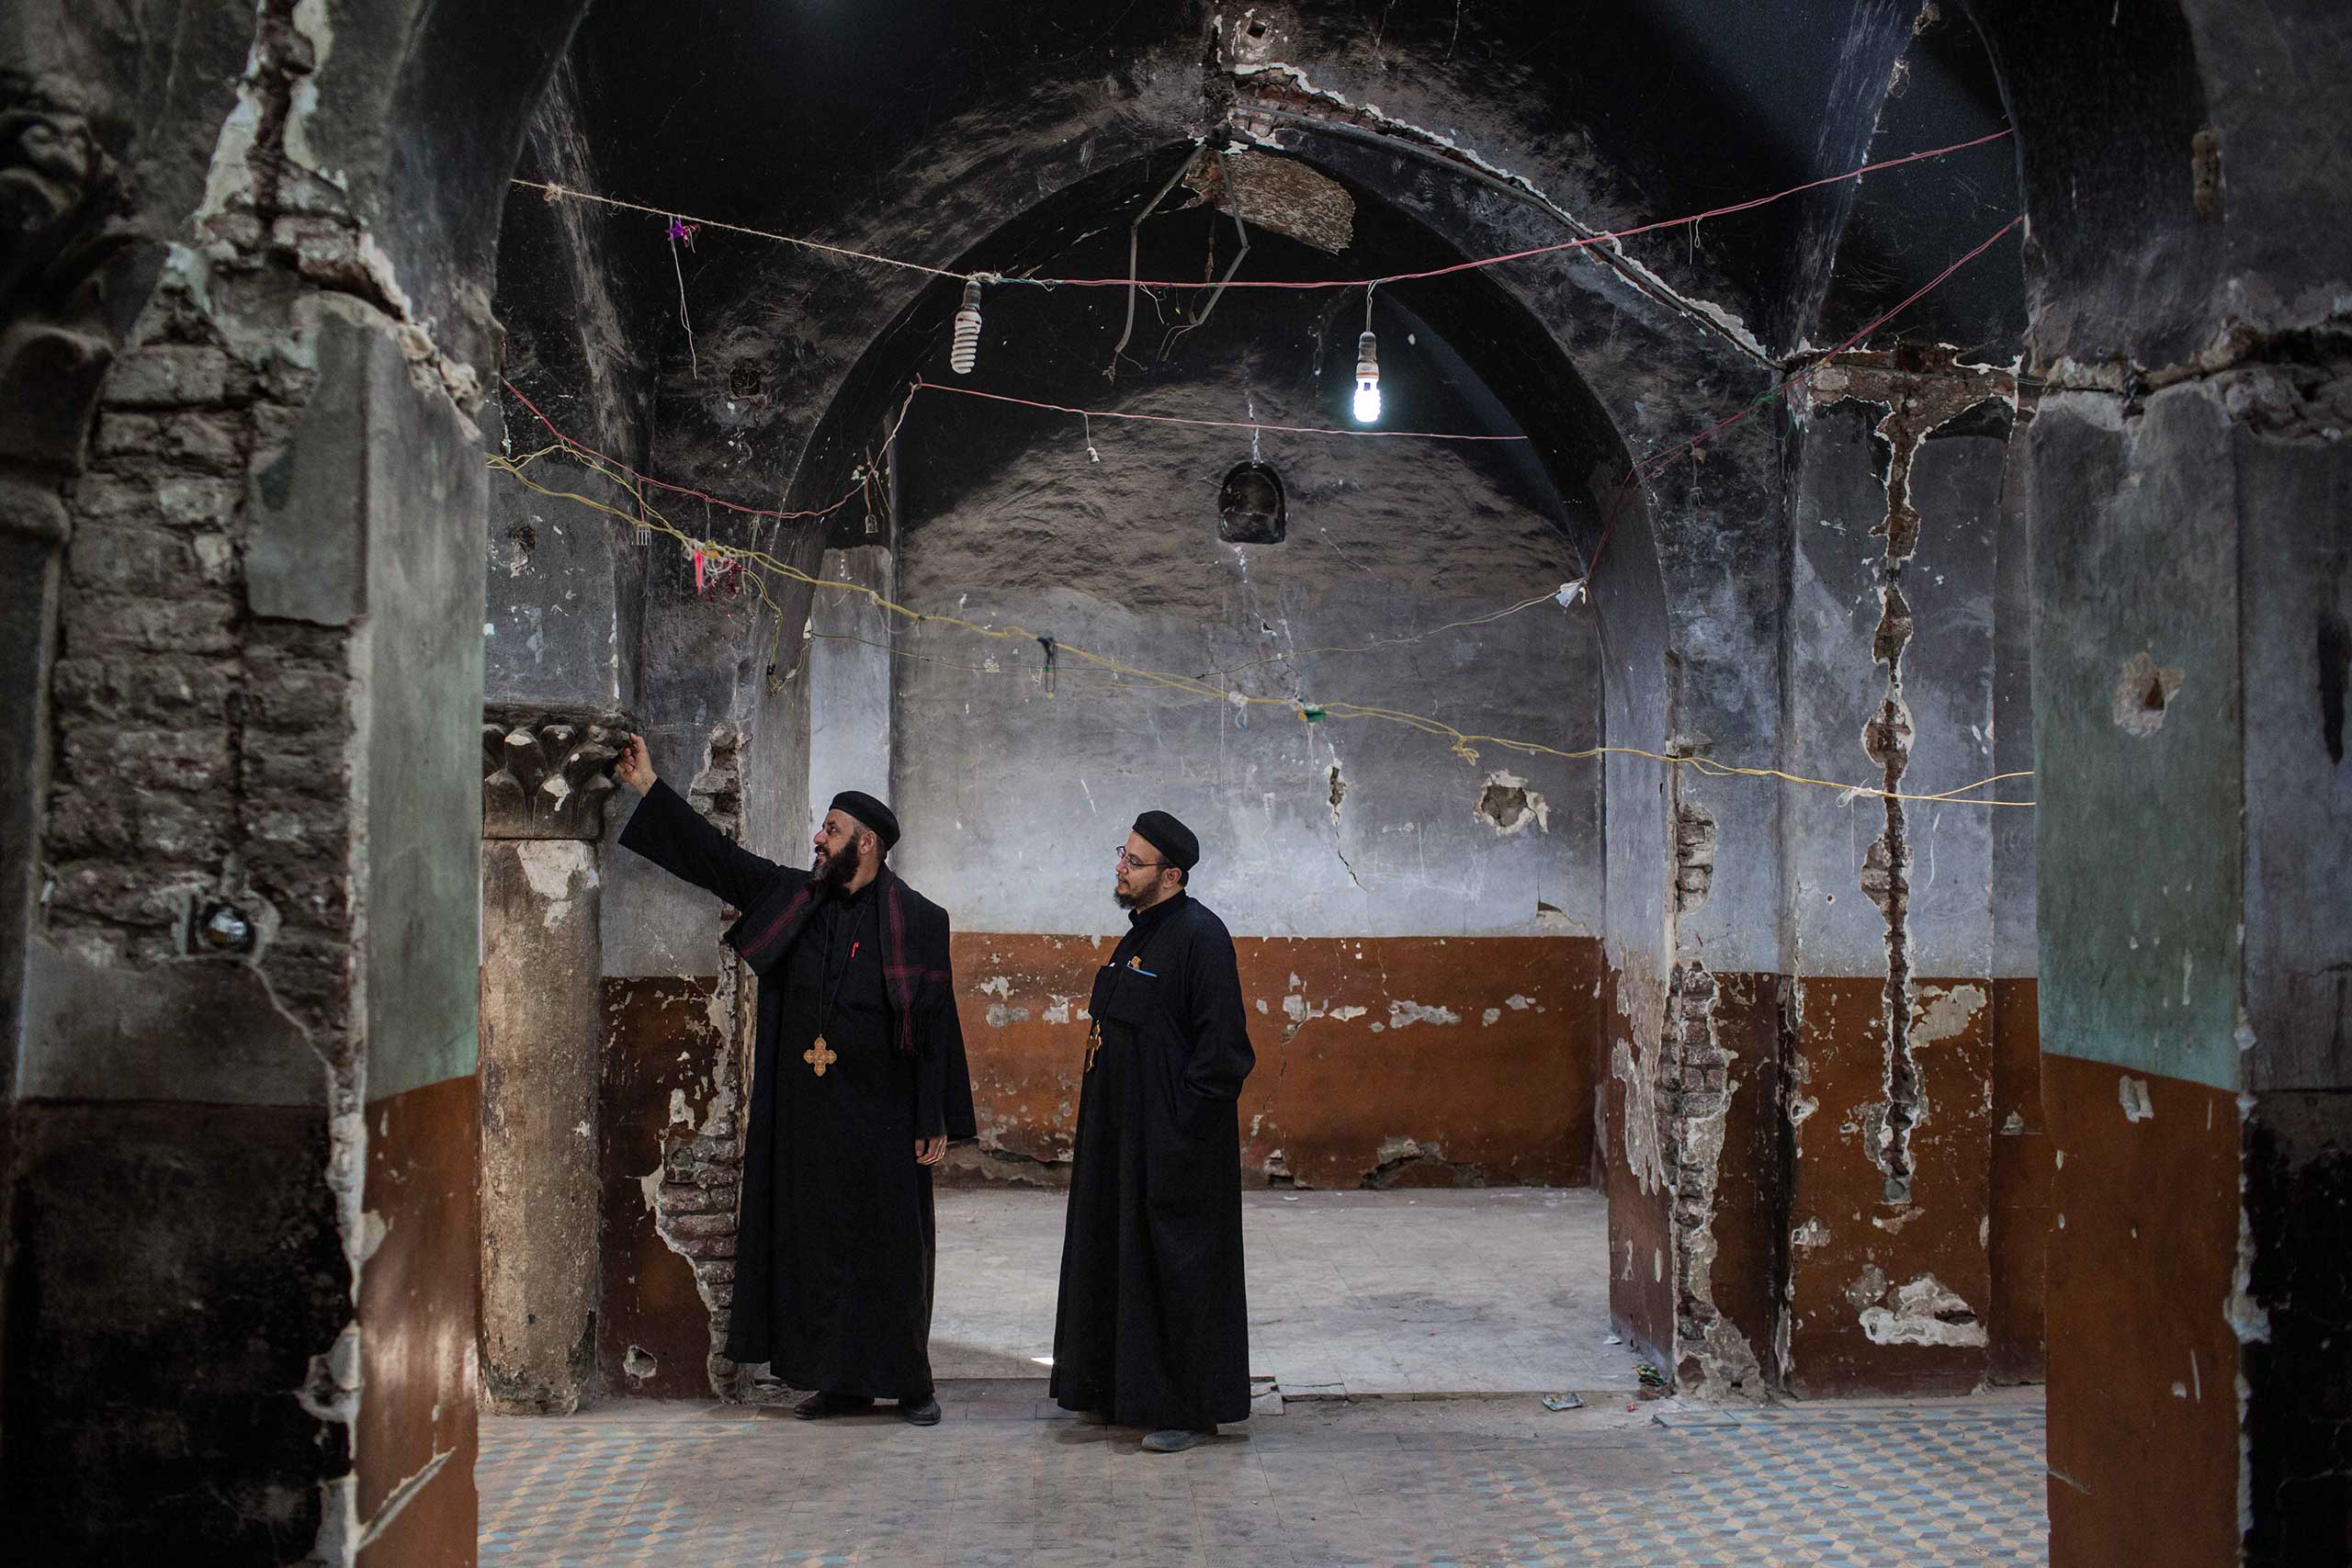 Silwanes Lotfy, the priest of the Anba Ebram church, looks at the destroyed side of the historical church in Delga village, Al Minya, Egypt, Feb. 29, 2016.